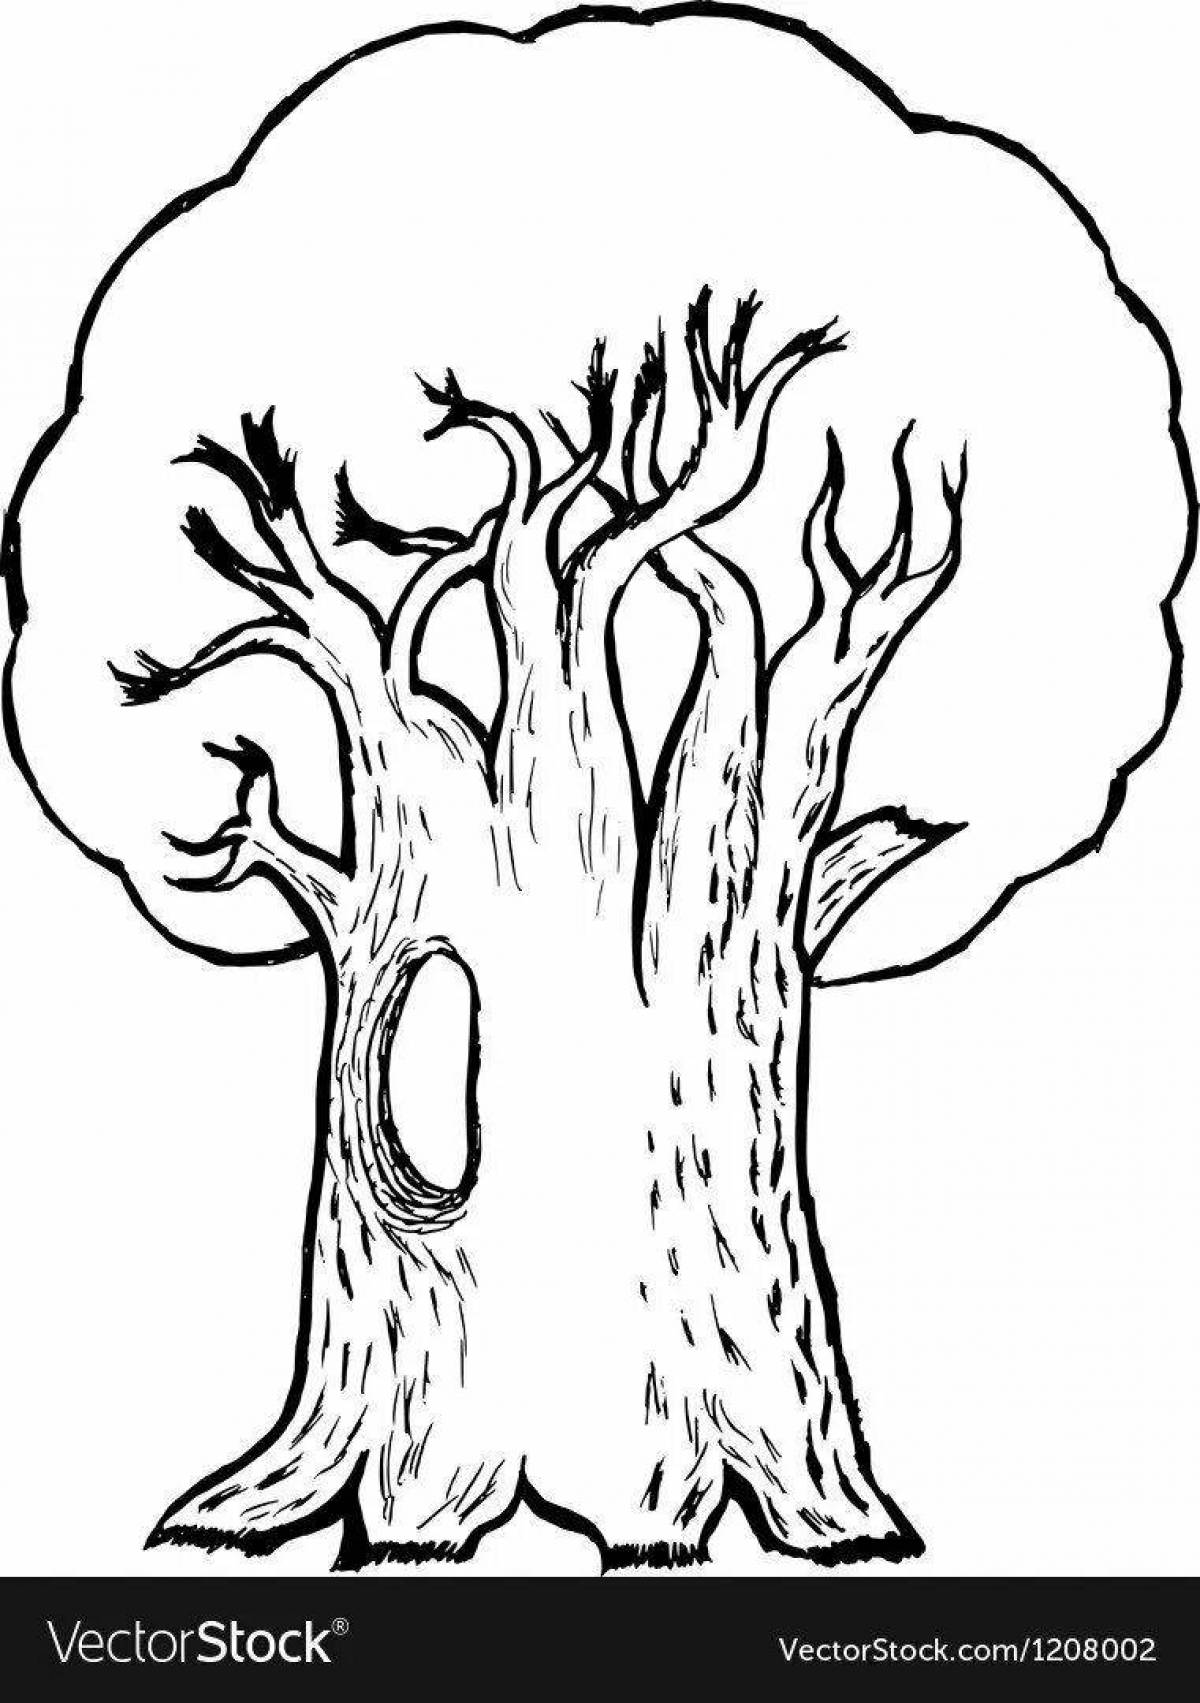 Playful oak tree coloring page for kids